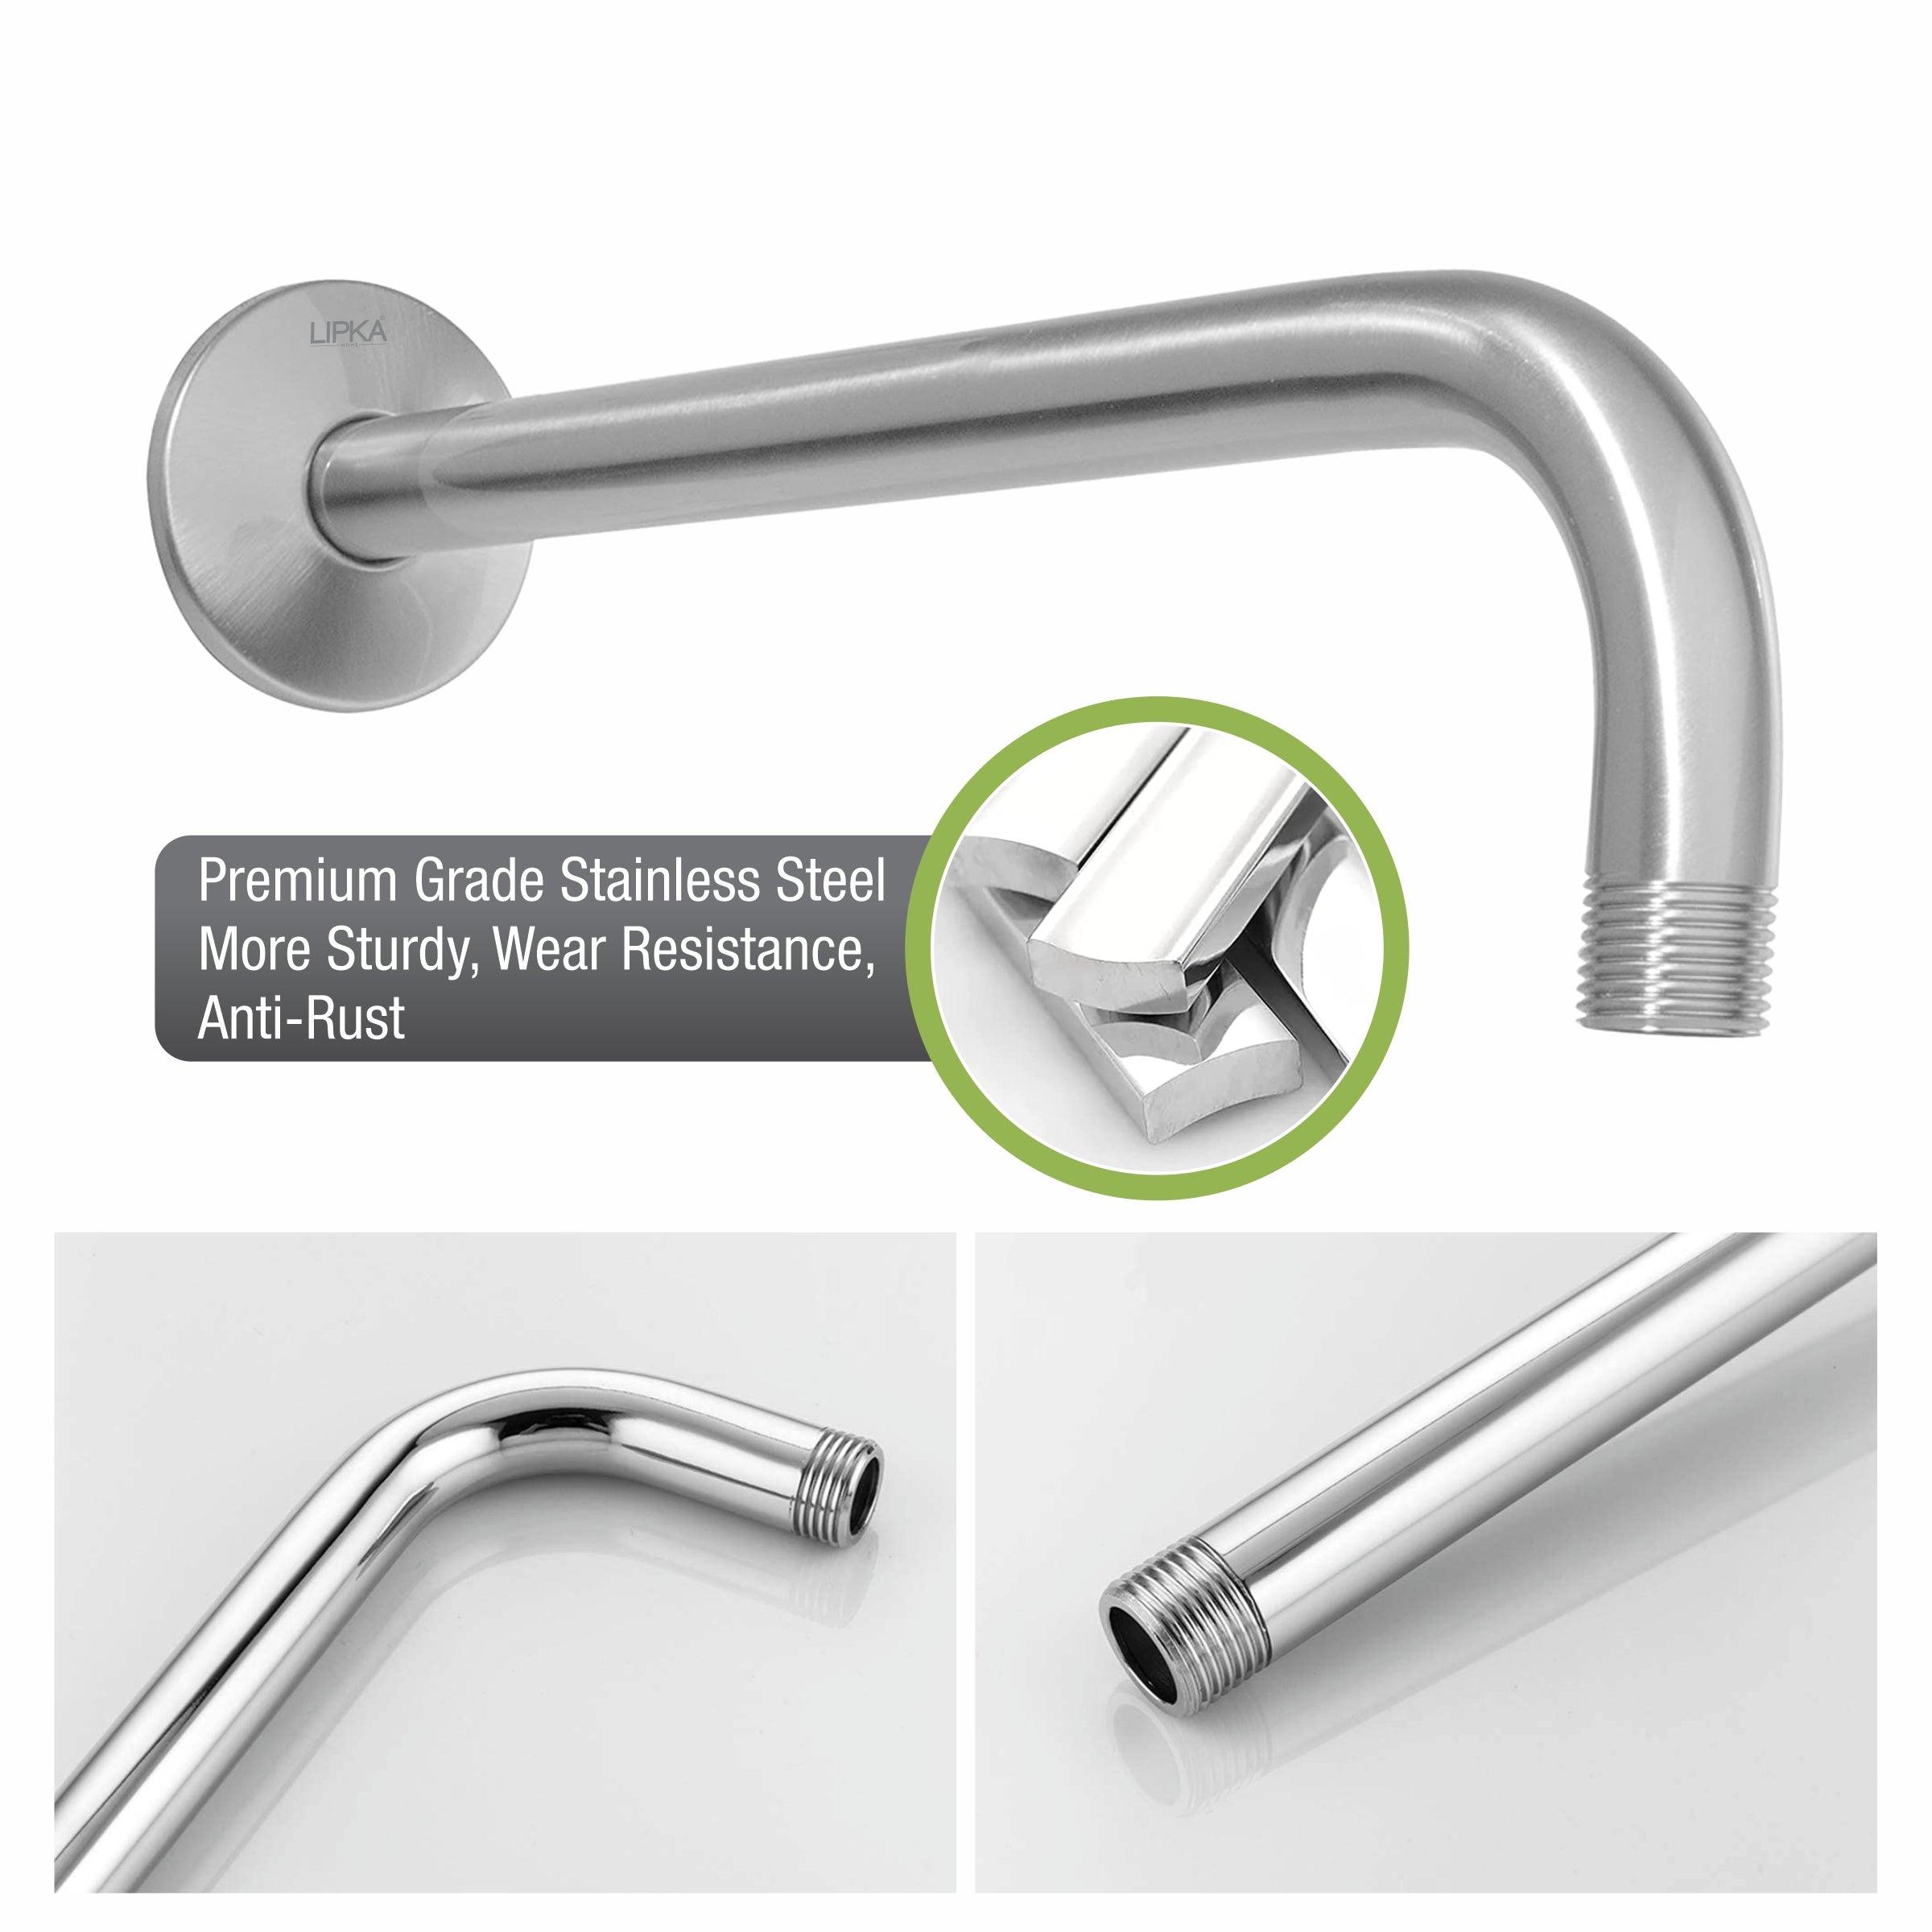 Full Bend Round Shower Arm (18 Inches) premium stainless steel 